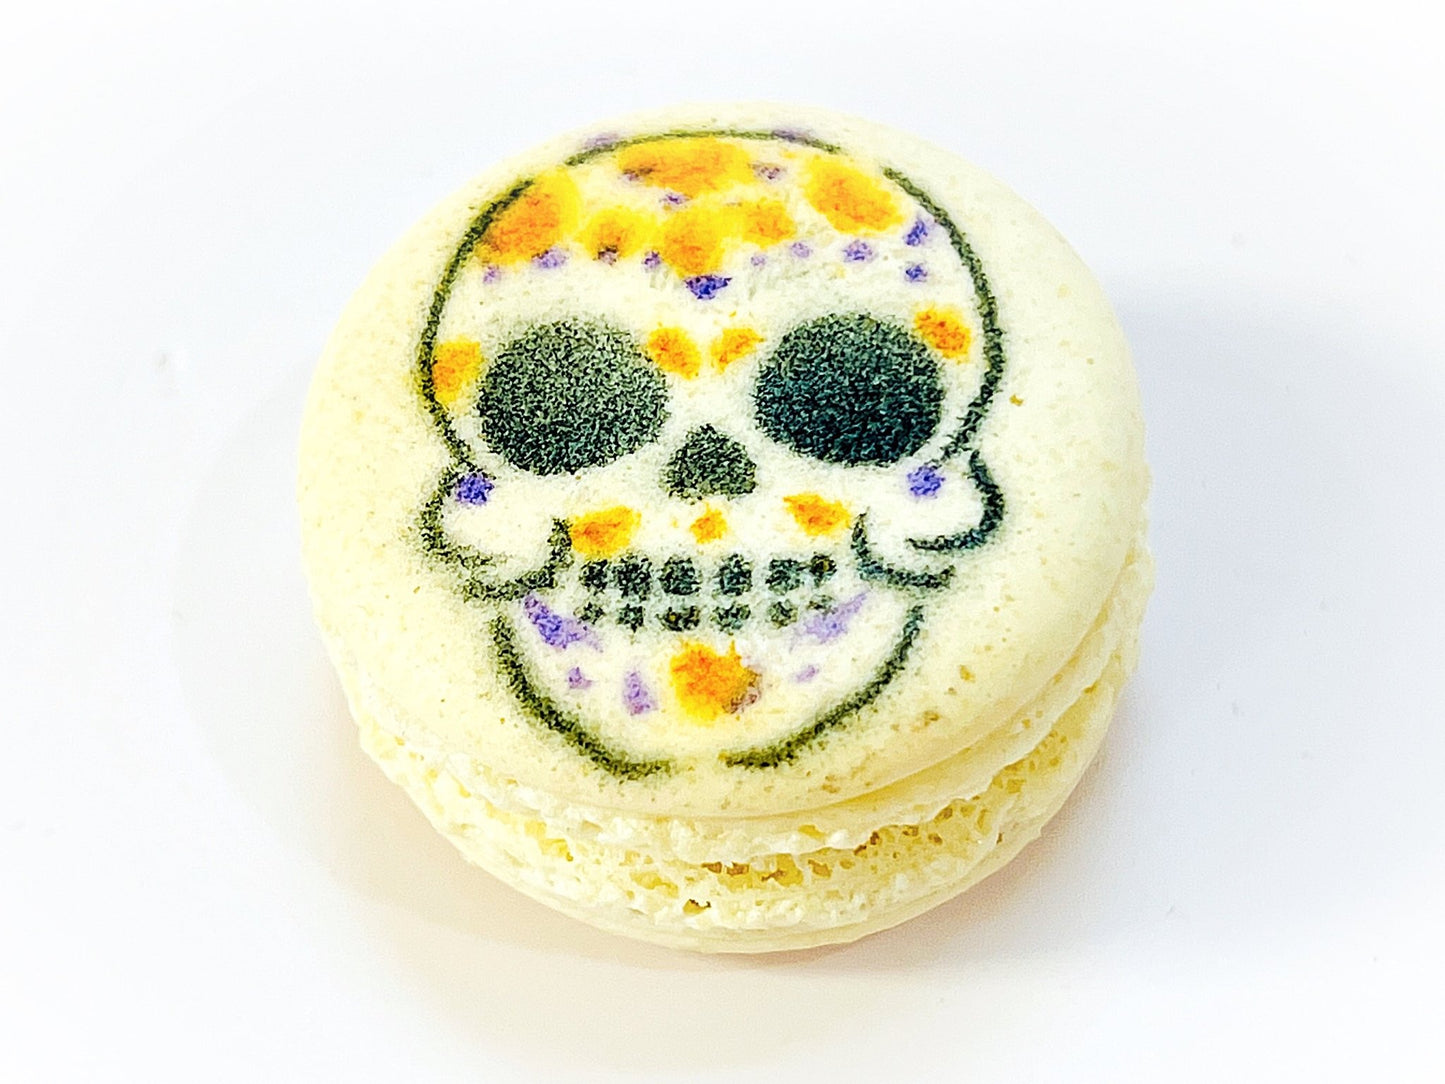 Day of the Death French Macaron V.3 - Macaron Centrale6 Pack